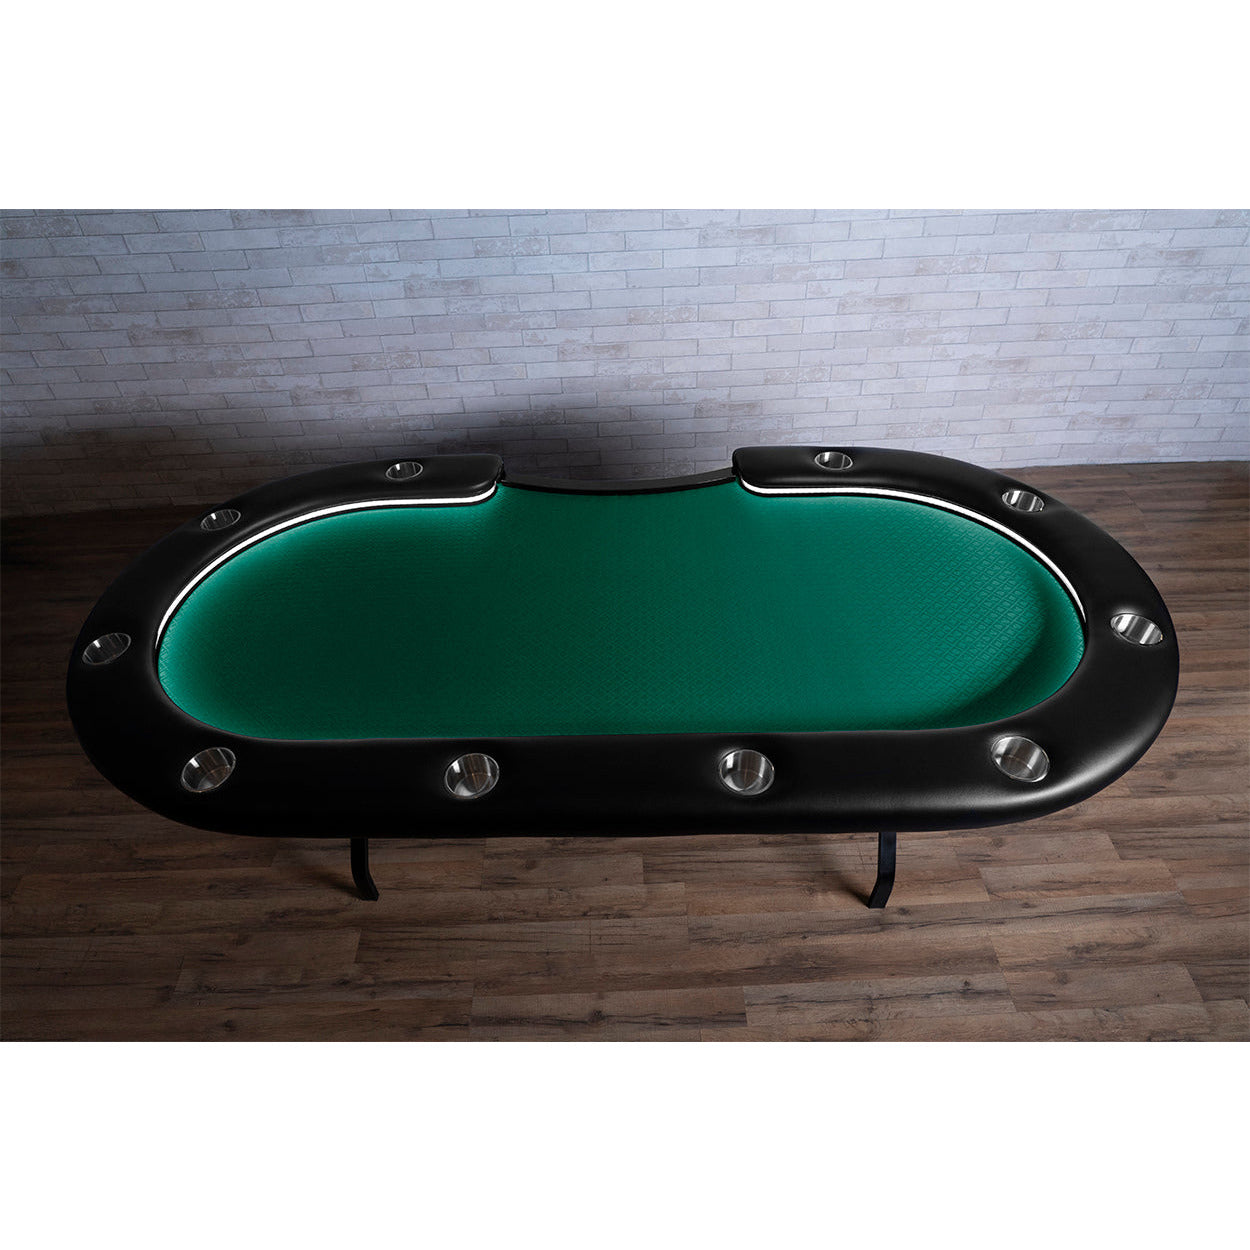 BBO The Aces Pro Alpha Folding Poker Table green speedcloth top view 